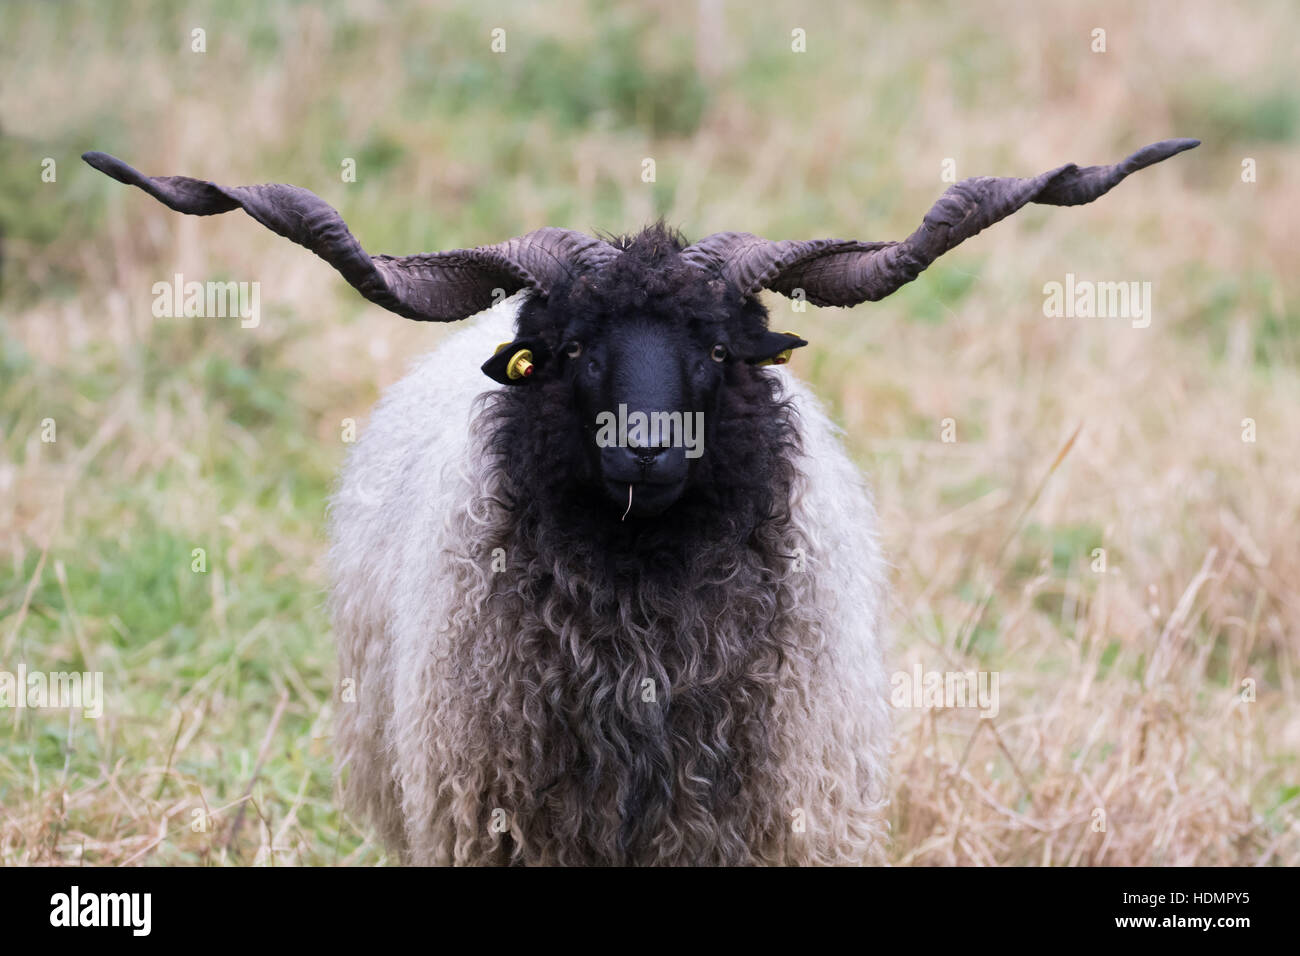 Racka sheep (Ovis aries strepsiceros Hungaricus) with long horns, Hesse, Germany Stock Photo